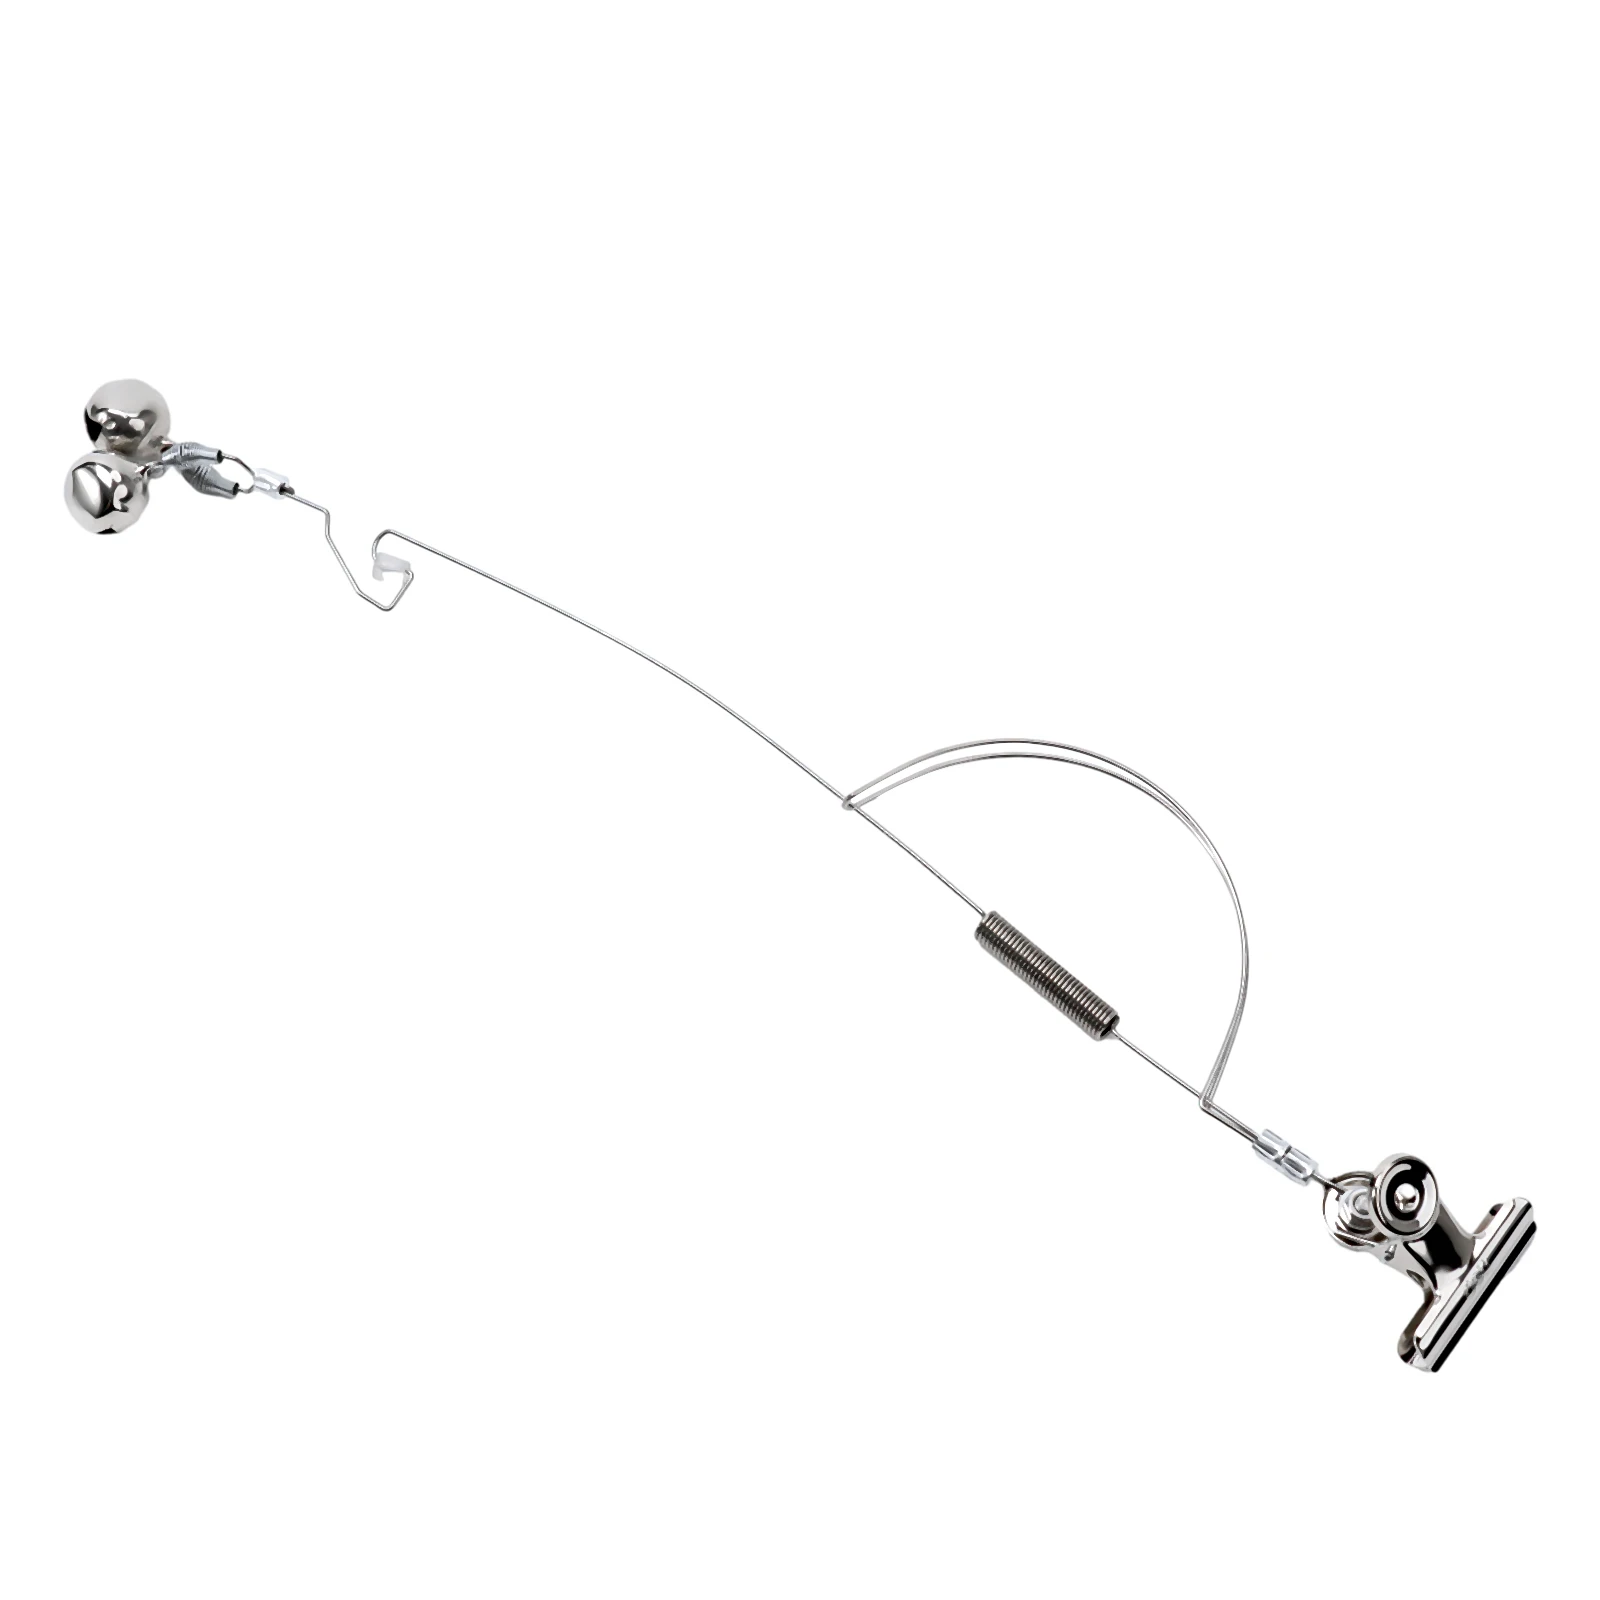 https://ae01.alicdn.com/kf/Sd5ac11b9fd744b7c8f32924f1cf26c36h/Durable-High-Quality-Fishing-Alarm-Fishing-Rod-Spare-Parts-Stainless-Steel-Bite-Loop-Alarm-Fishing-Clip.jpeg